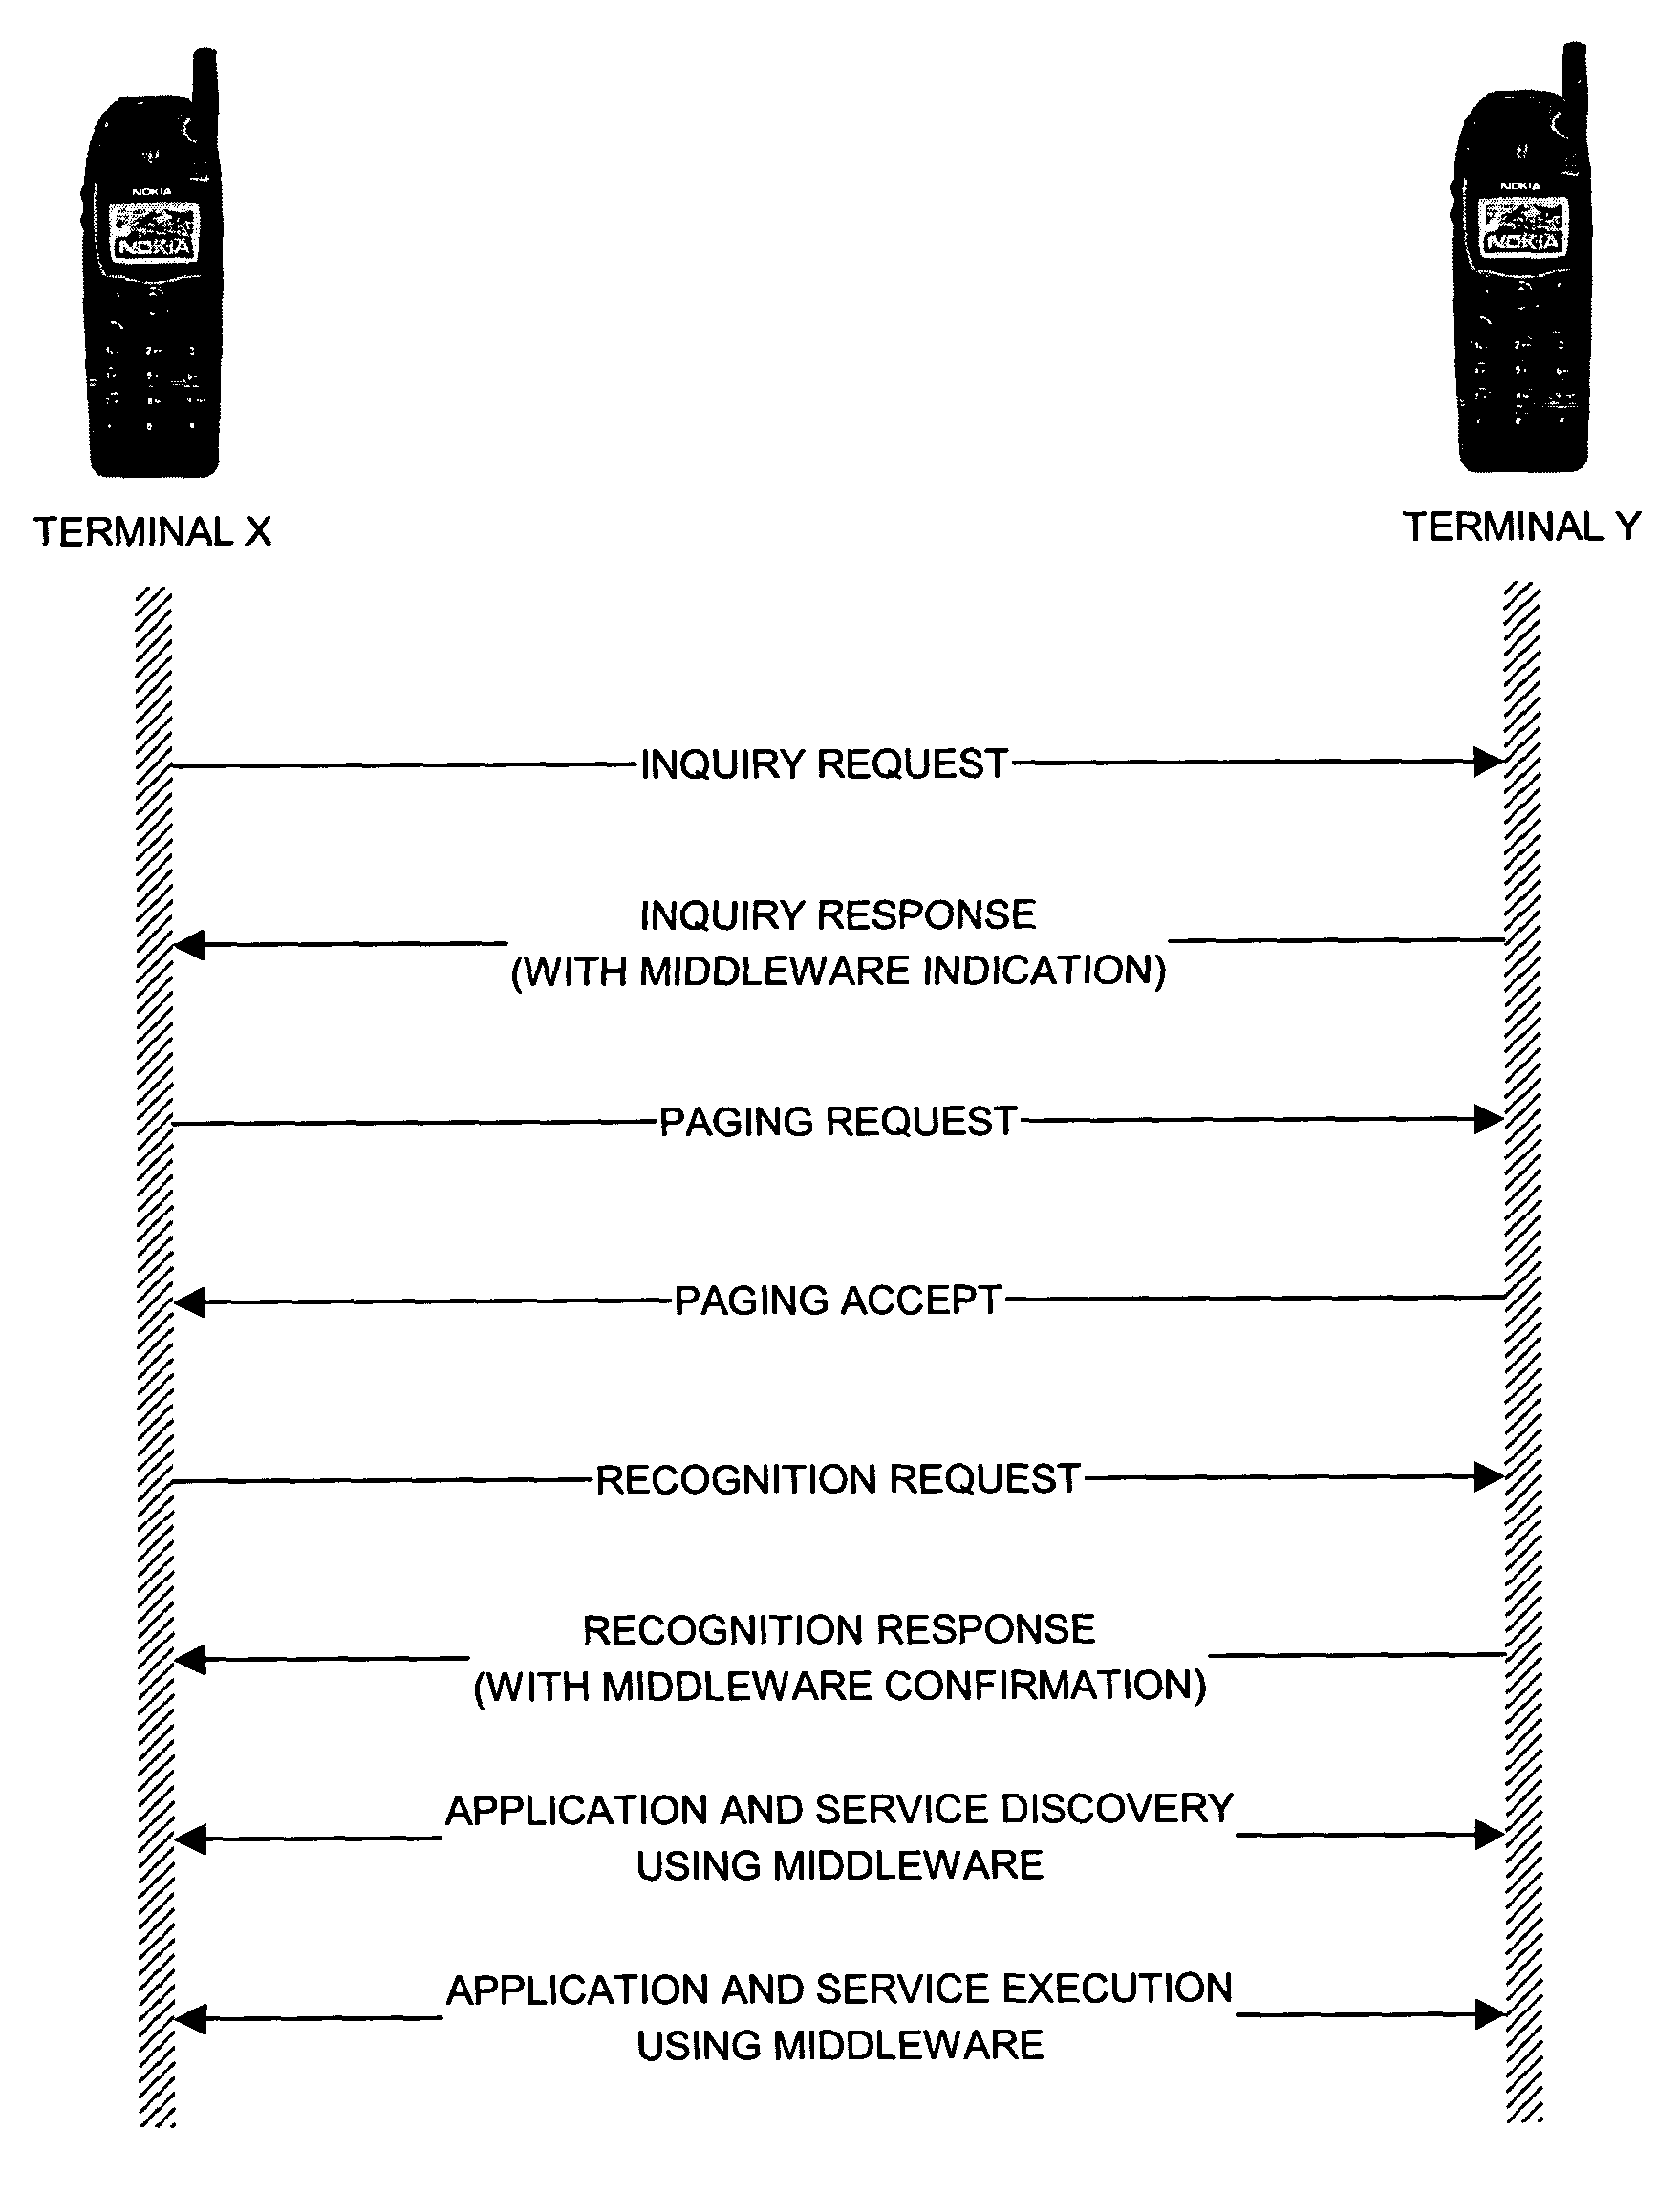 Application control in peer-to-peer ad-hoc communication networks